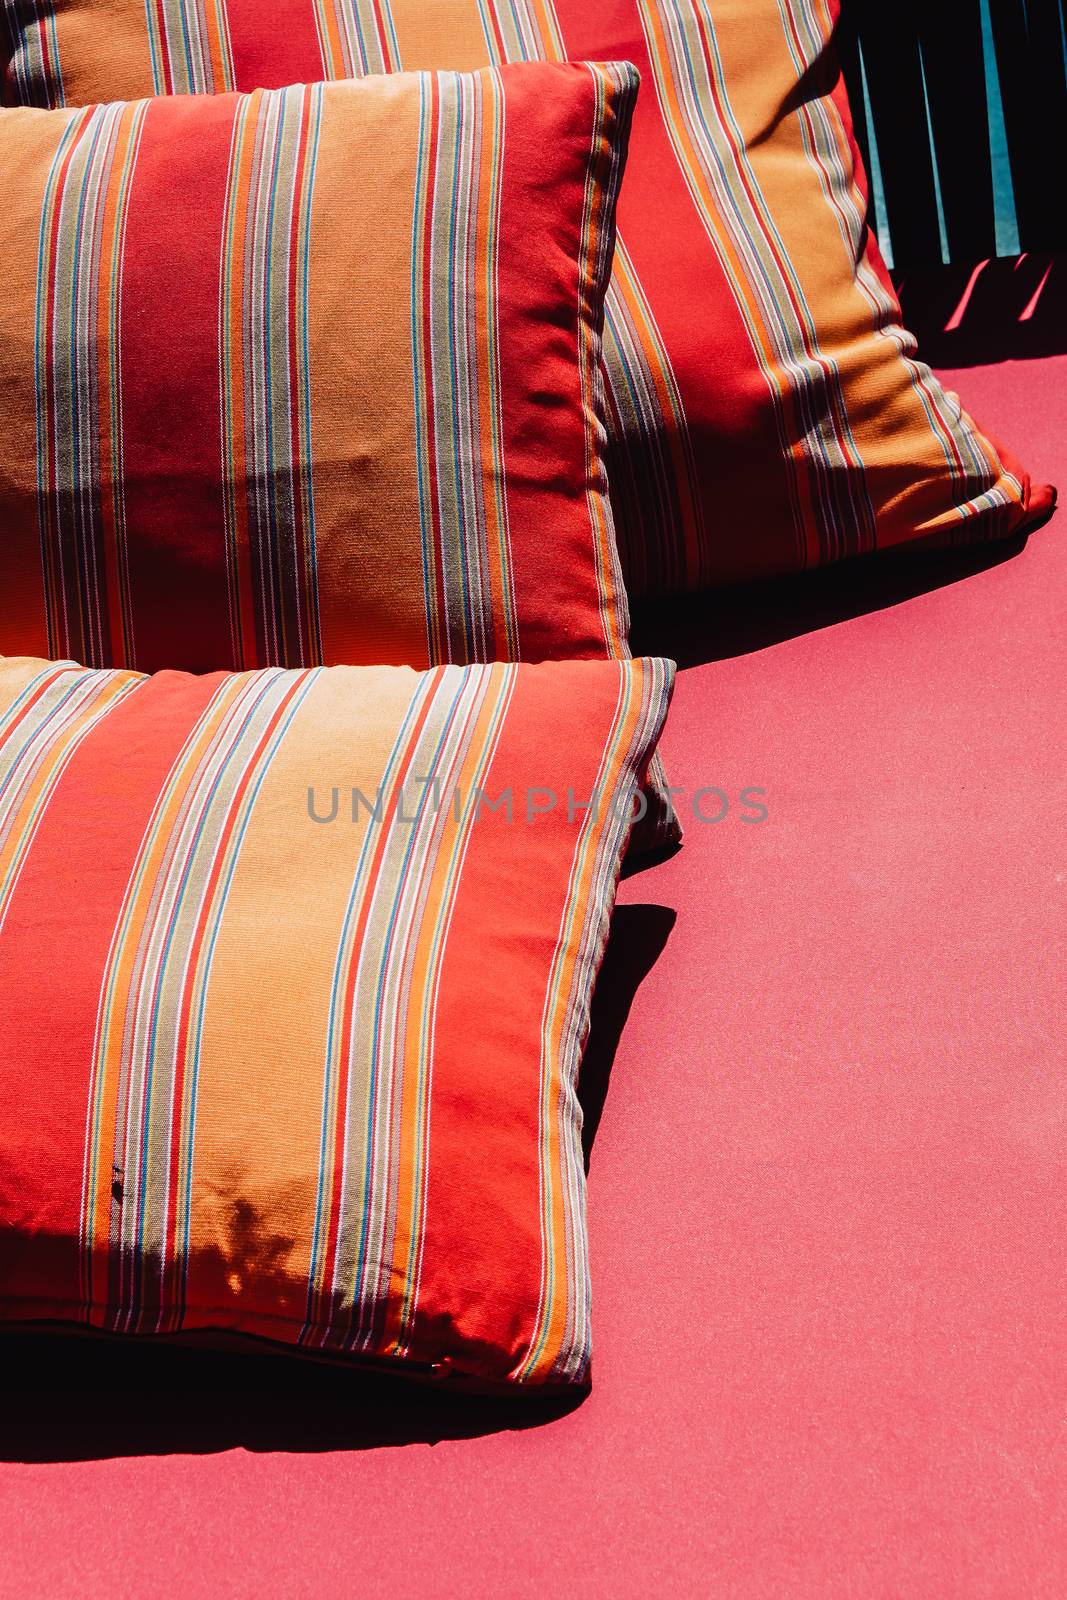 Colorful Cushion In Sofa by ponsulak